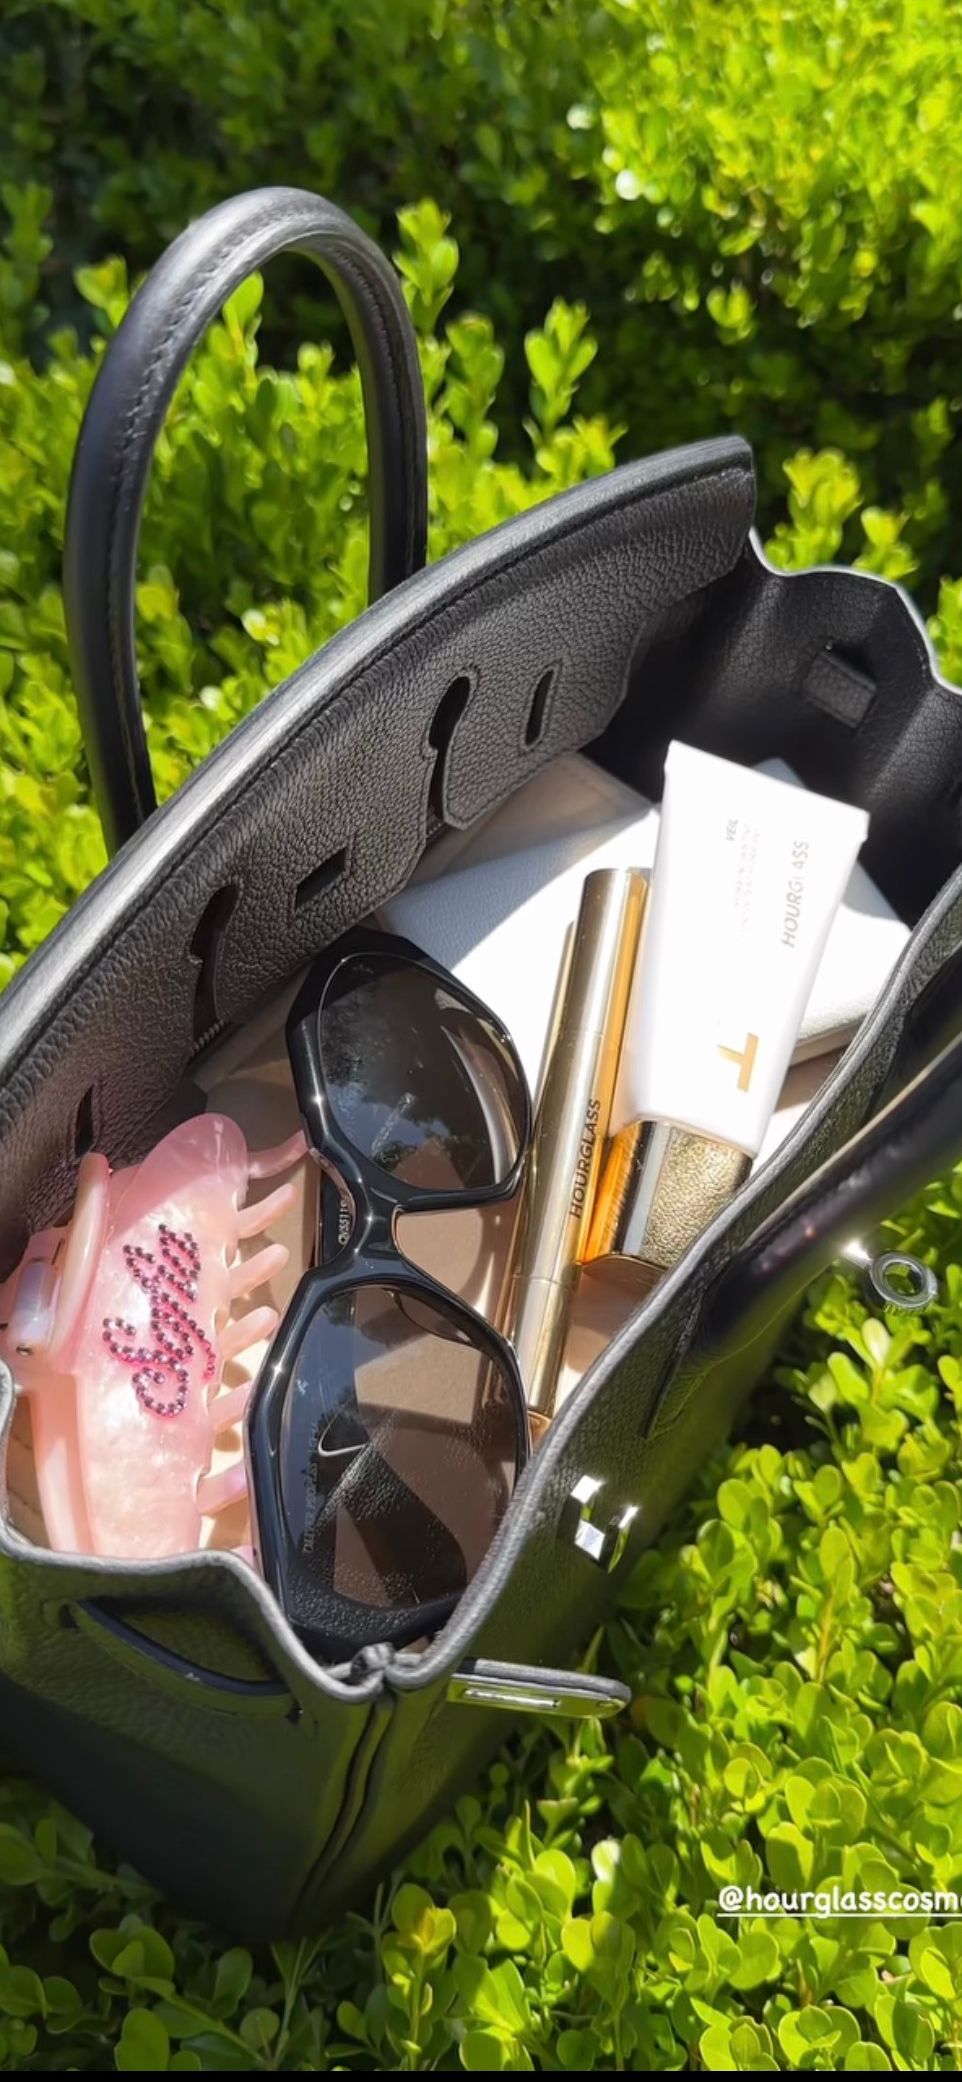 Sofia shared an image on Instagram of the contents of her handbag